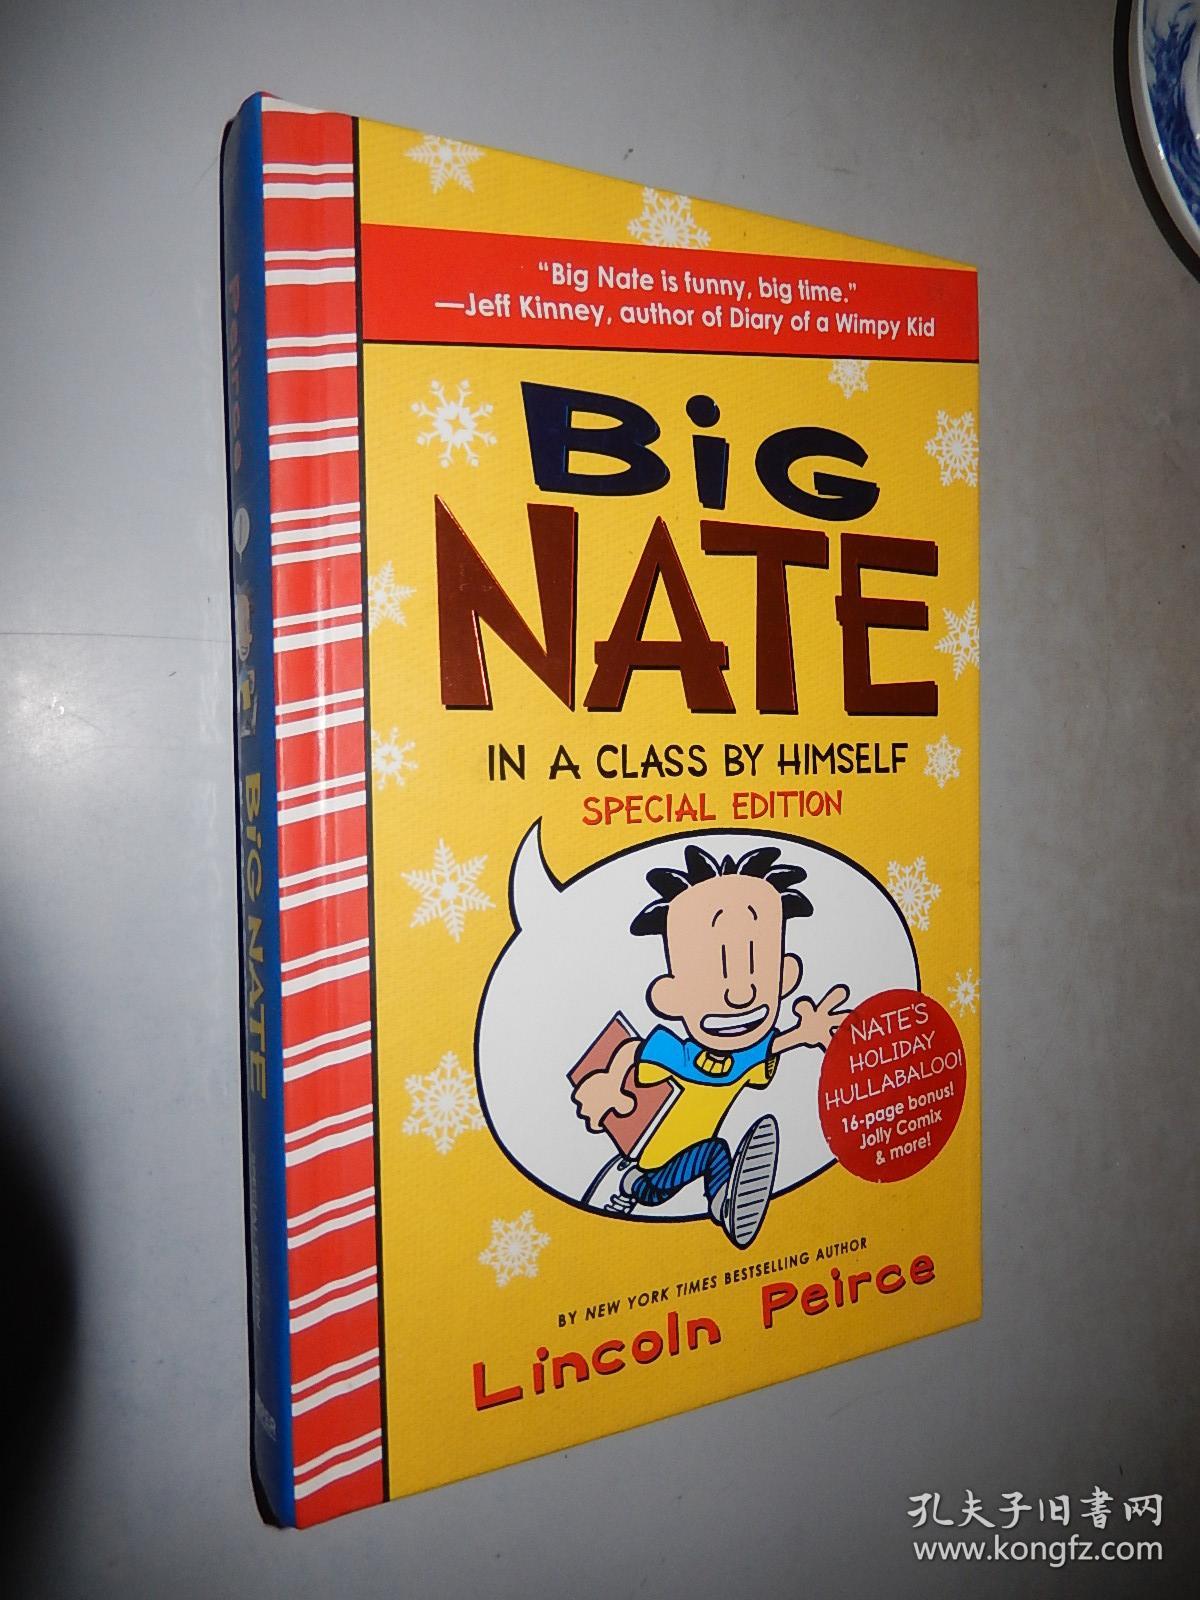 Big Nate: In a Class by Himself Special Edition